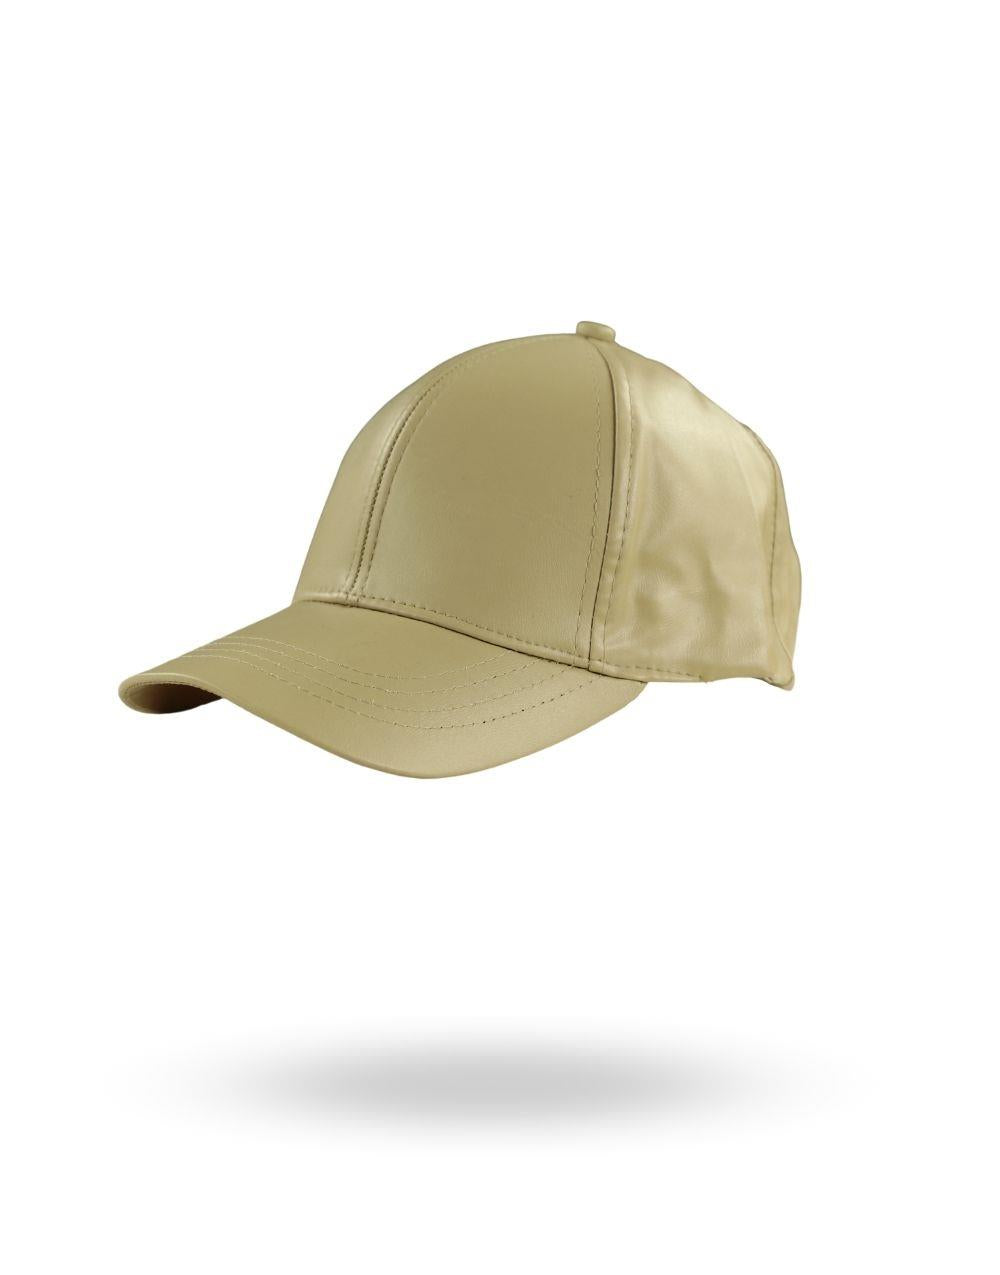 Basic Street Style Hat Mad Beige - STREETMODE ™